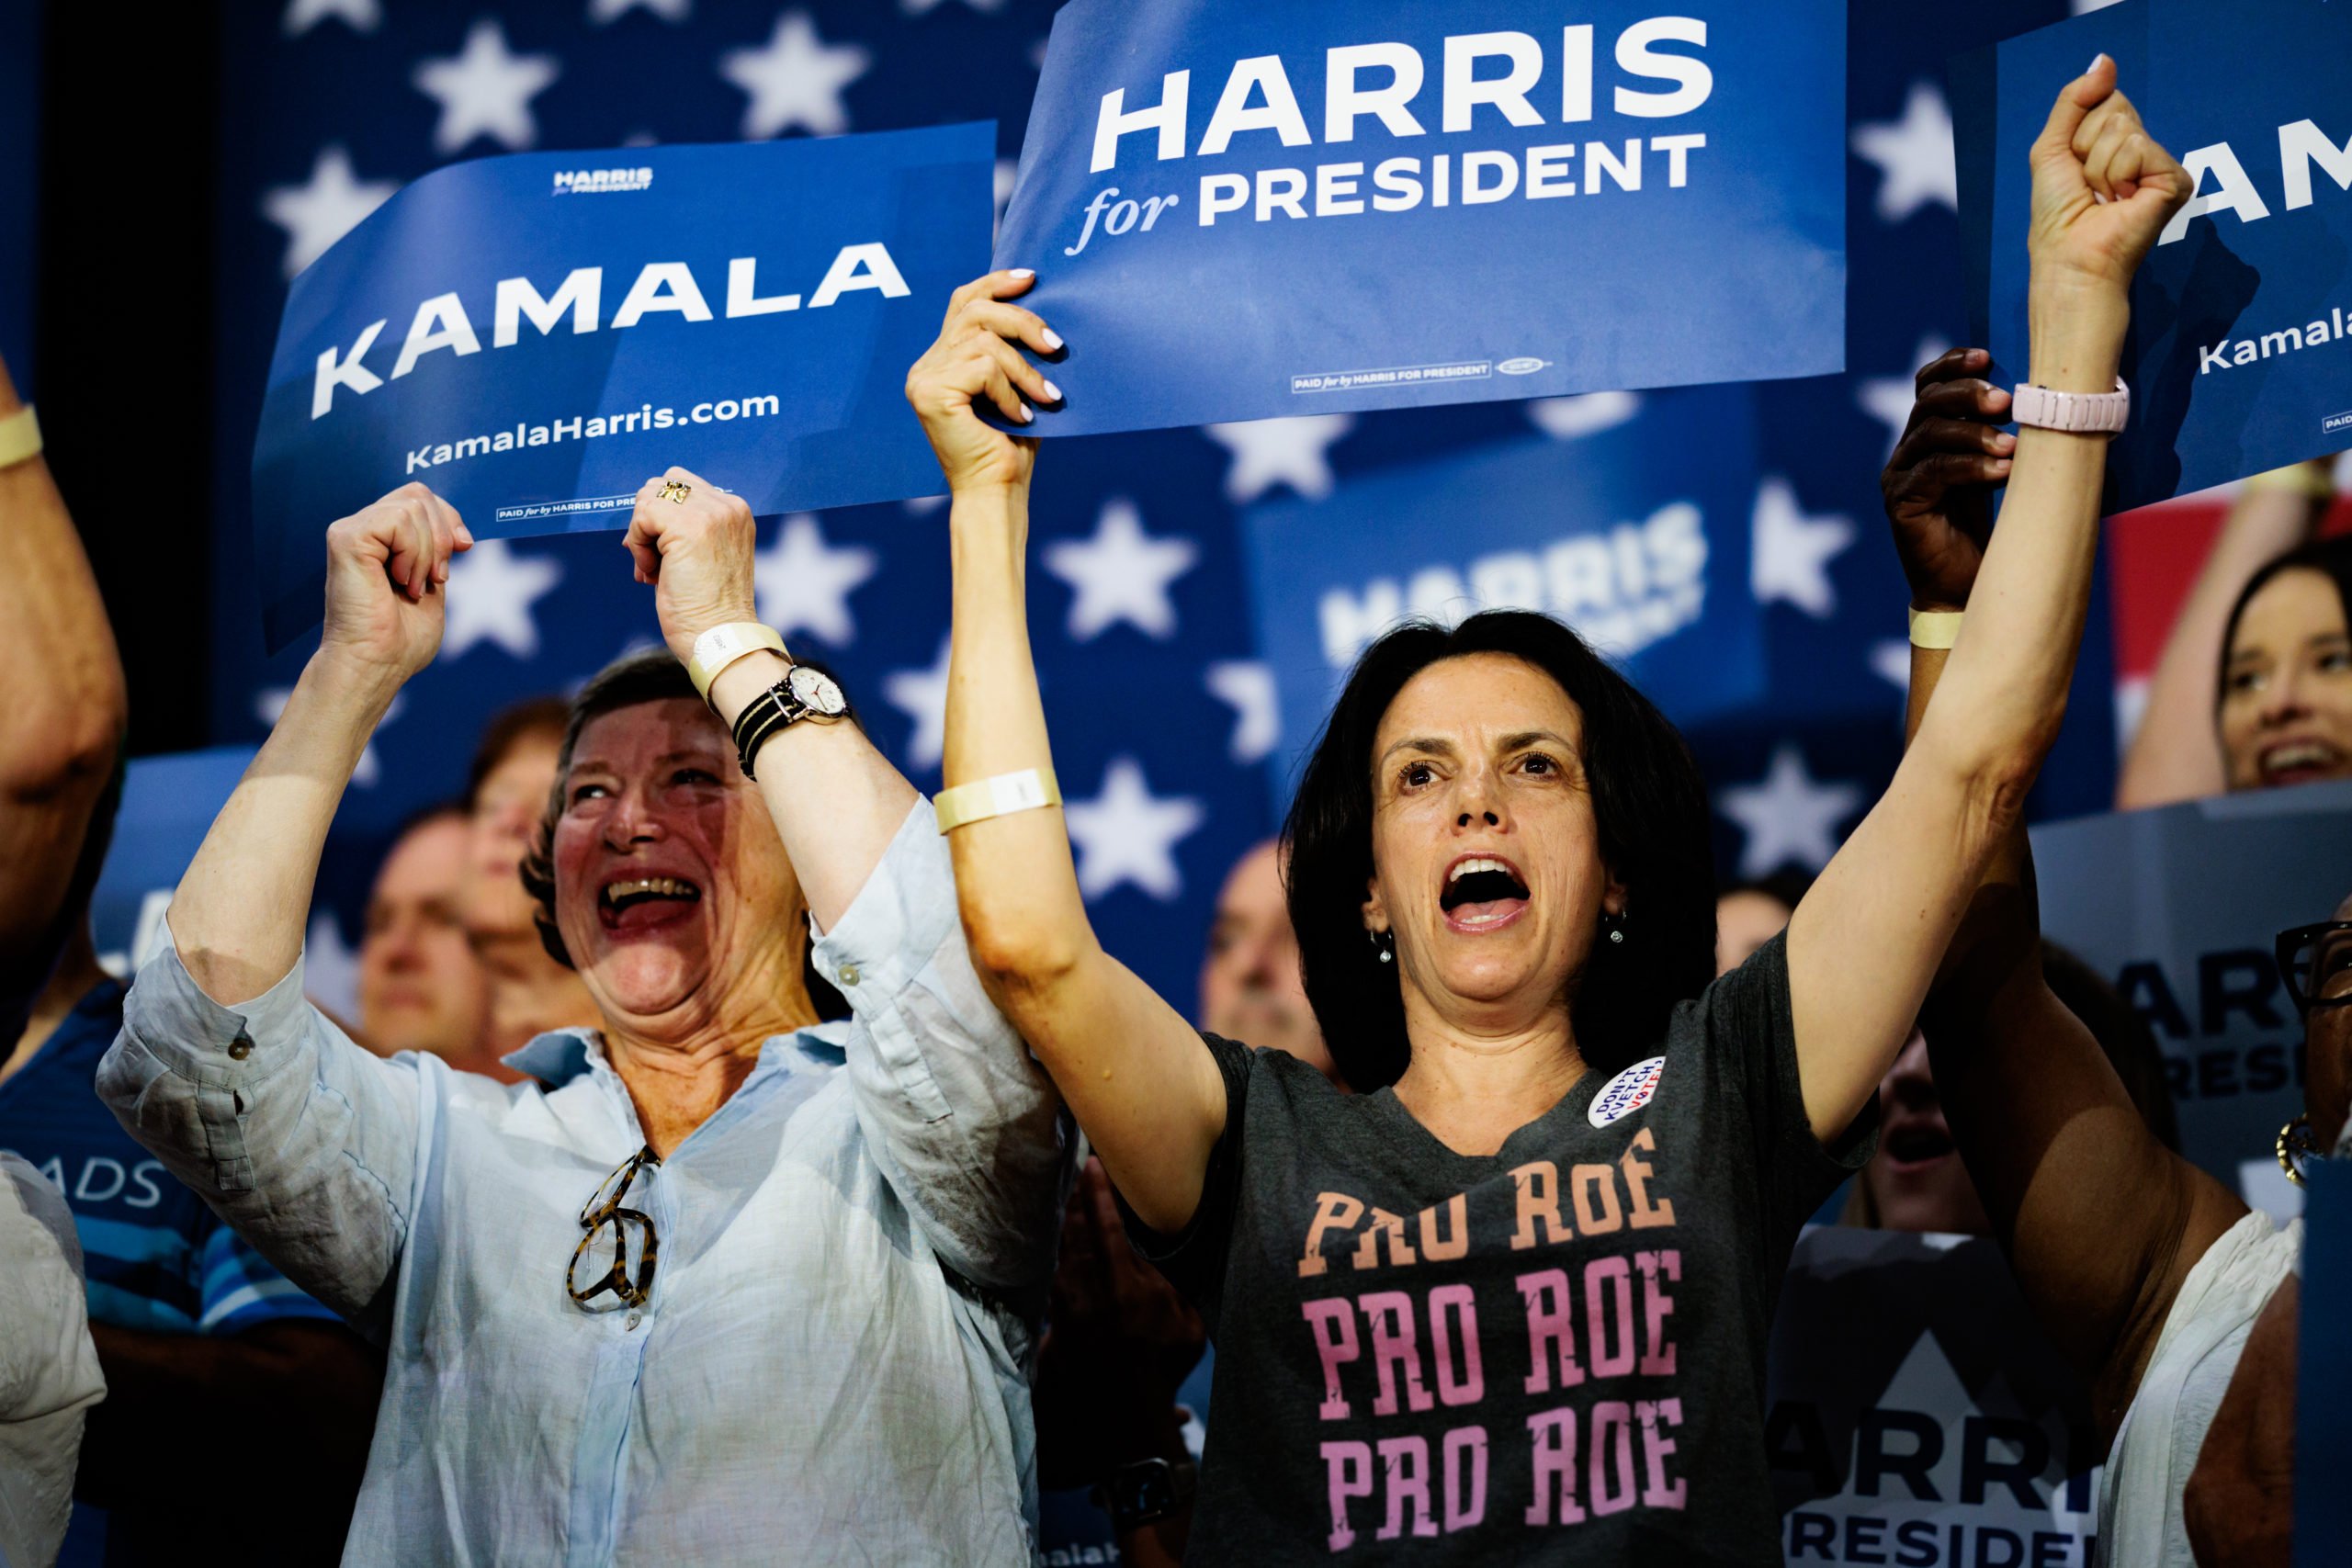 People cheer during a campaign rally for Vice President Kamala Harris on July 29, 2024 in Ambler, Pennsylvania. Pennsylvania Governor Josh Shapiro and Michigan Governor Gretchen Whitmer campaigned to bring supporters behind Vice President Harris's campaign to protect Americans' freedoms, lower costs for families, and slam Trump's Project 2025 agenda. (Photo by Hannah Beier/Getty Images)